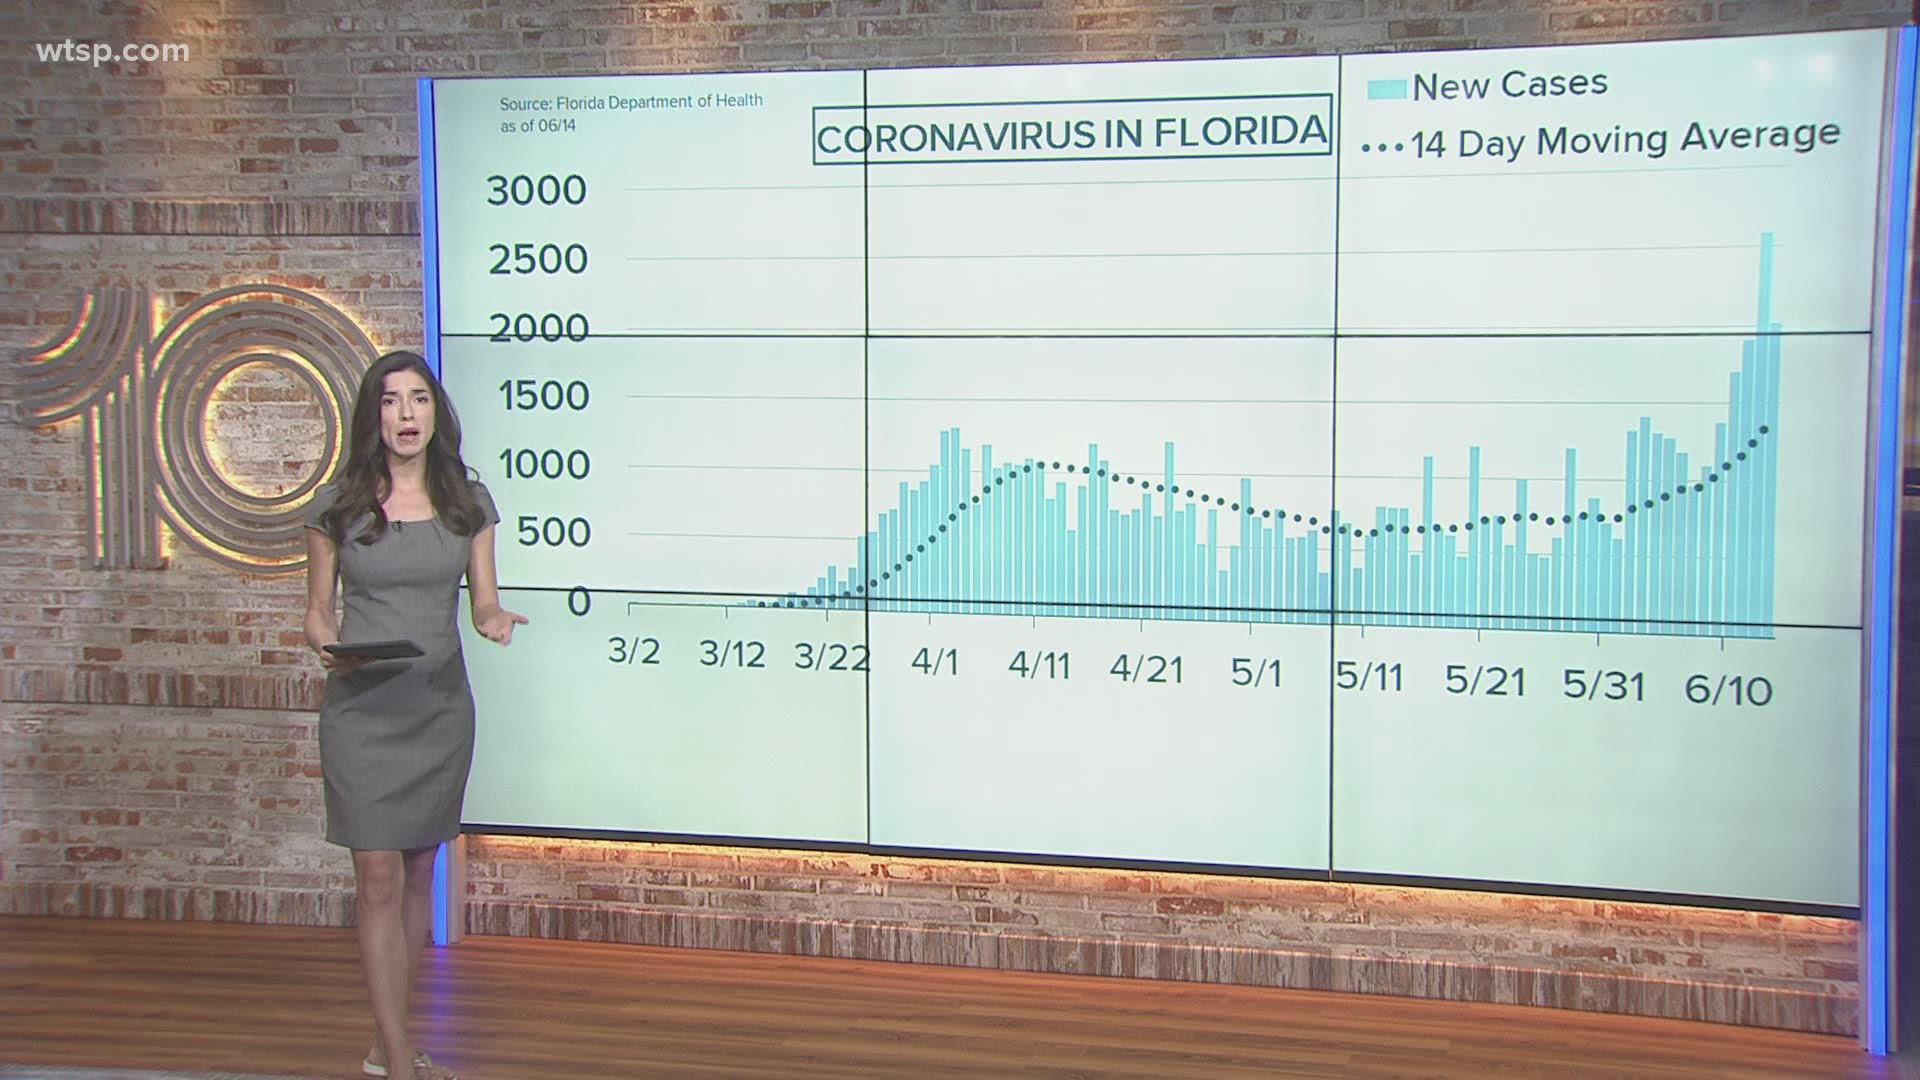 For the first time in three days, Florida did not break its single-day record for the number of new confirmed cases of COVID-19 in the state.